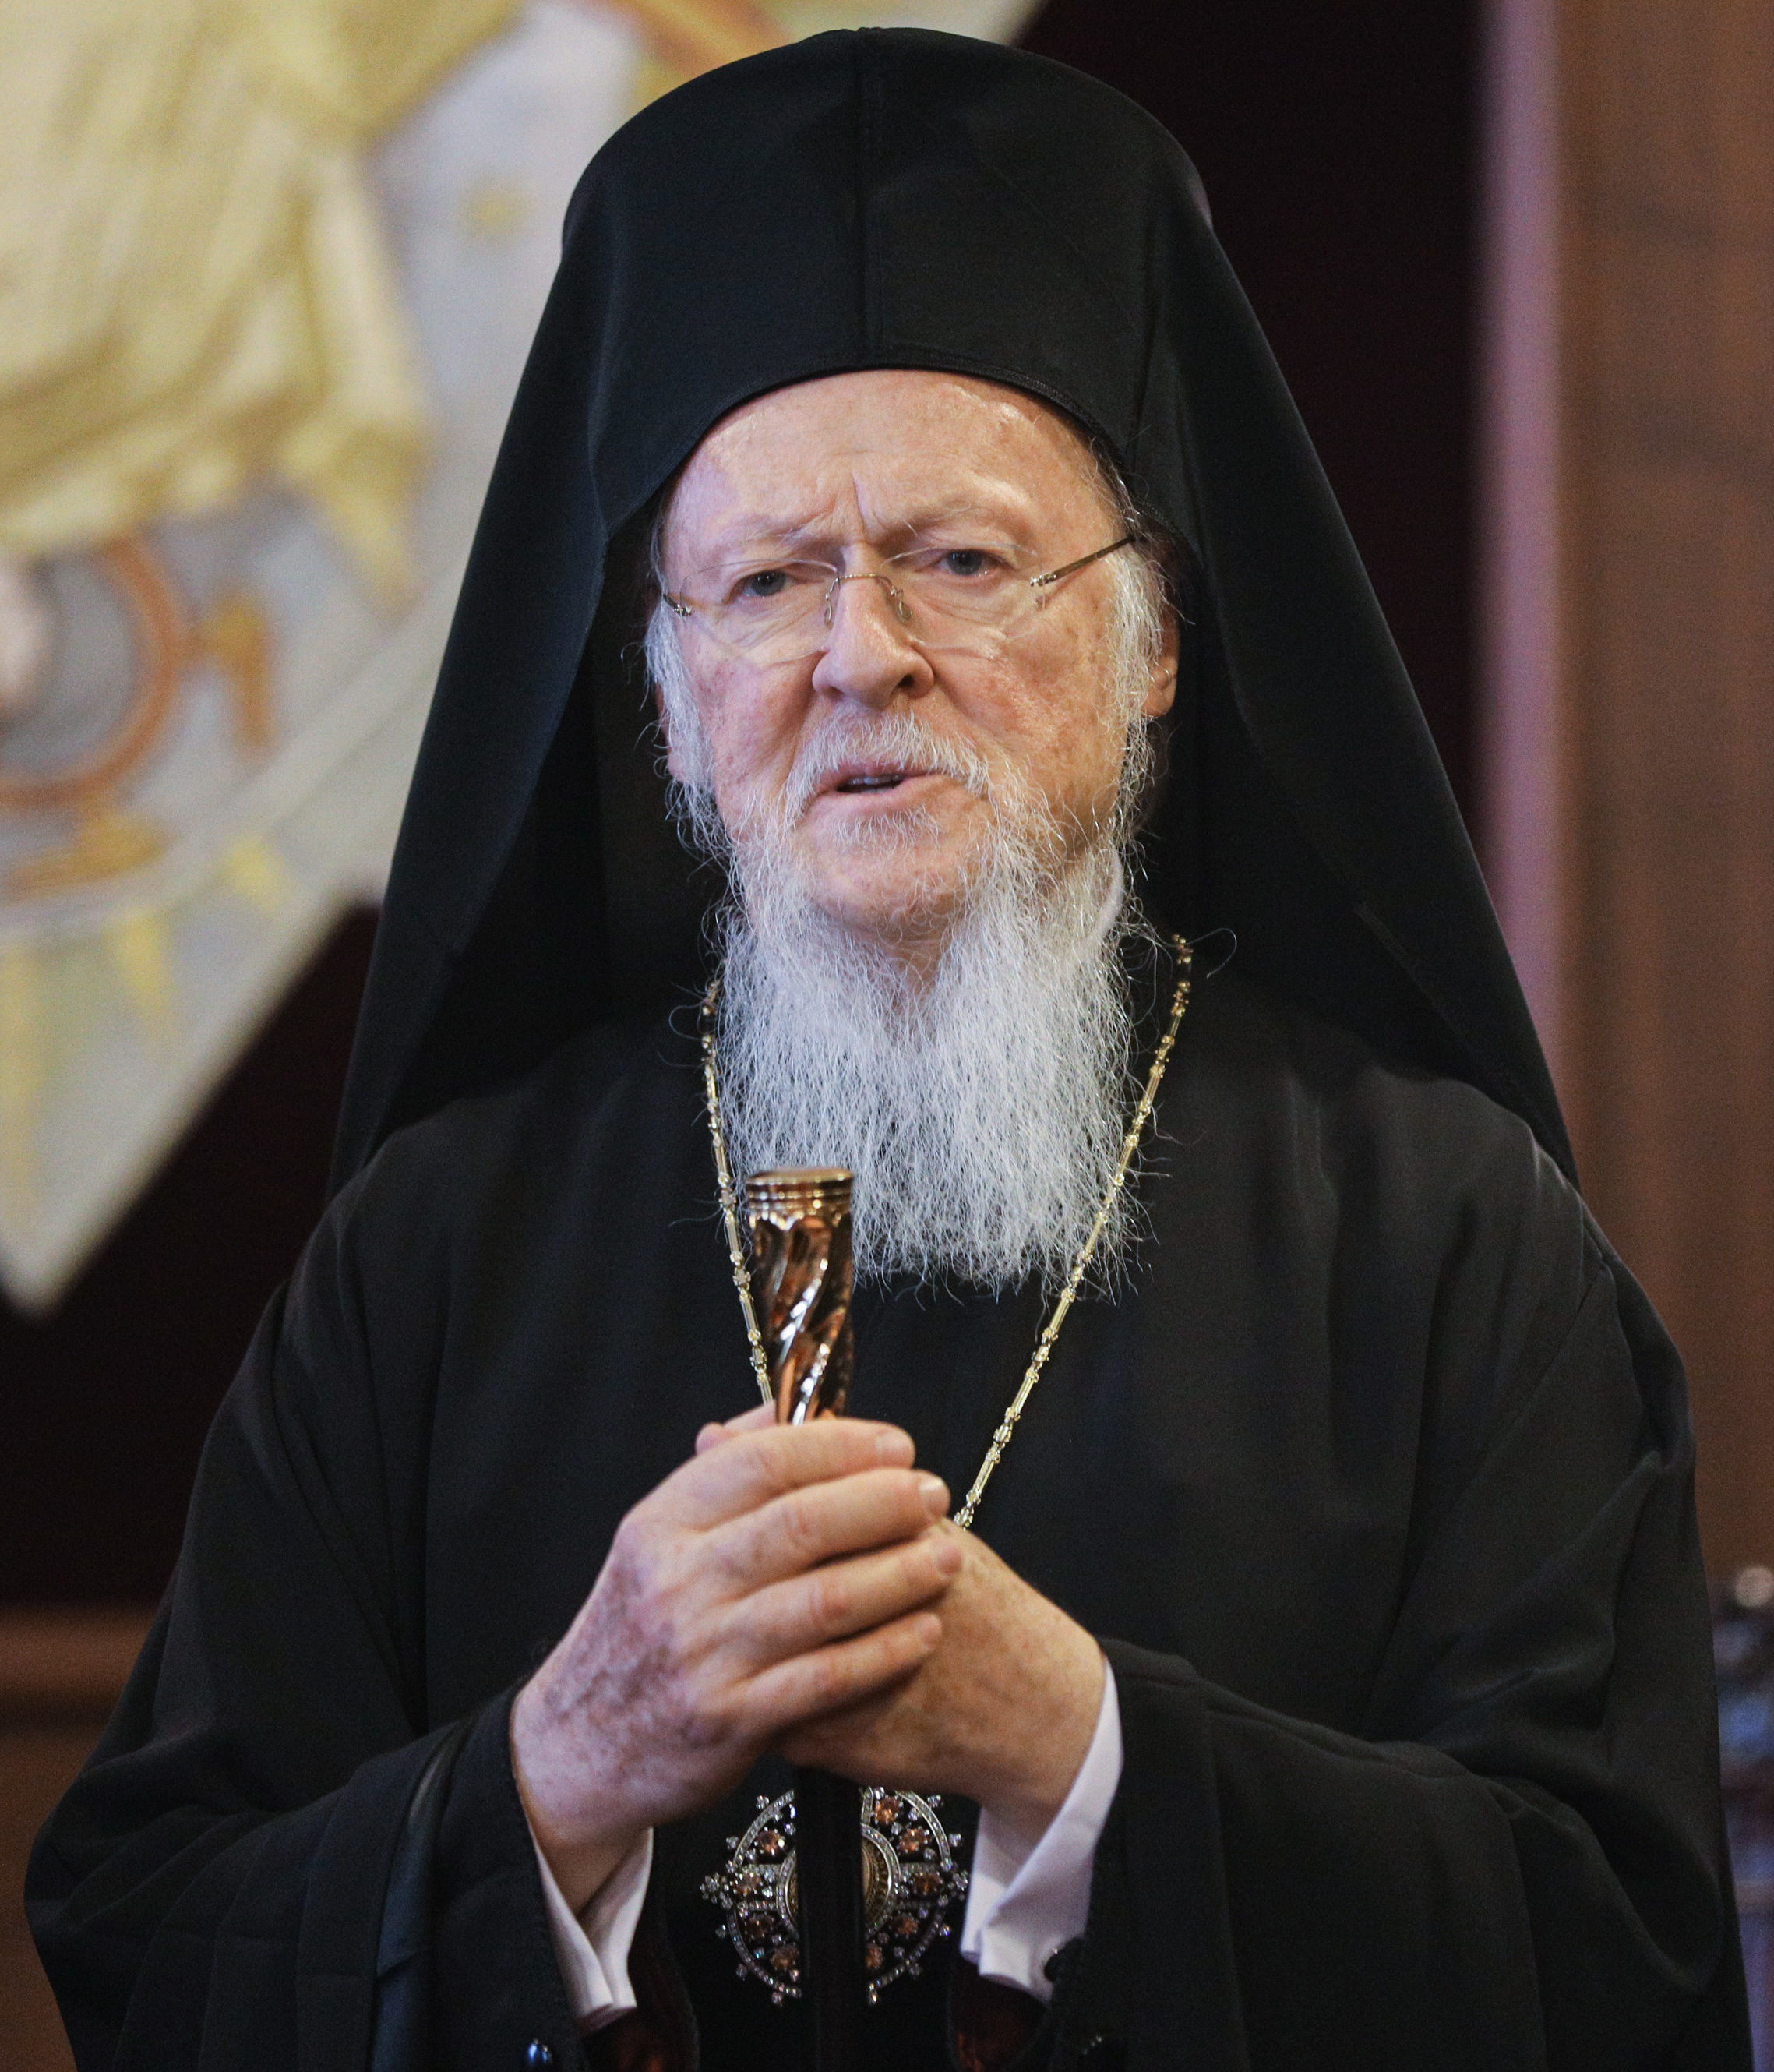 Orthodox spiritual leader says Russian church has 'disappointed us' over Ukraine